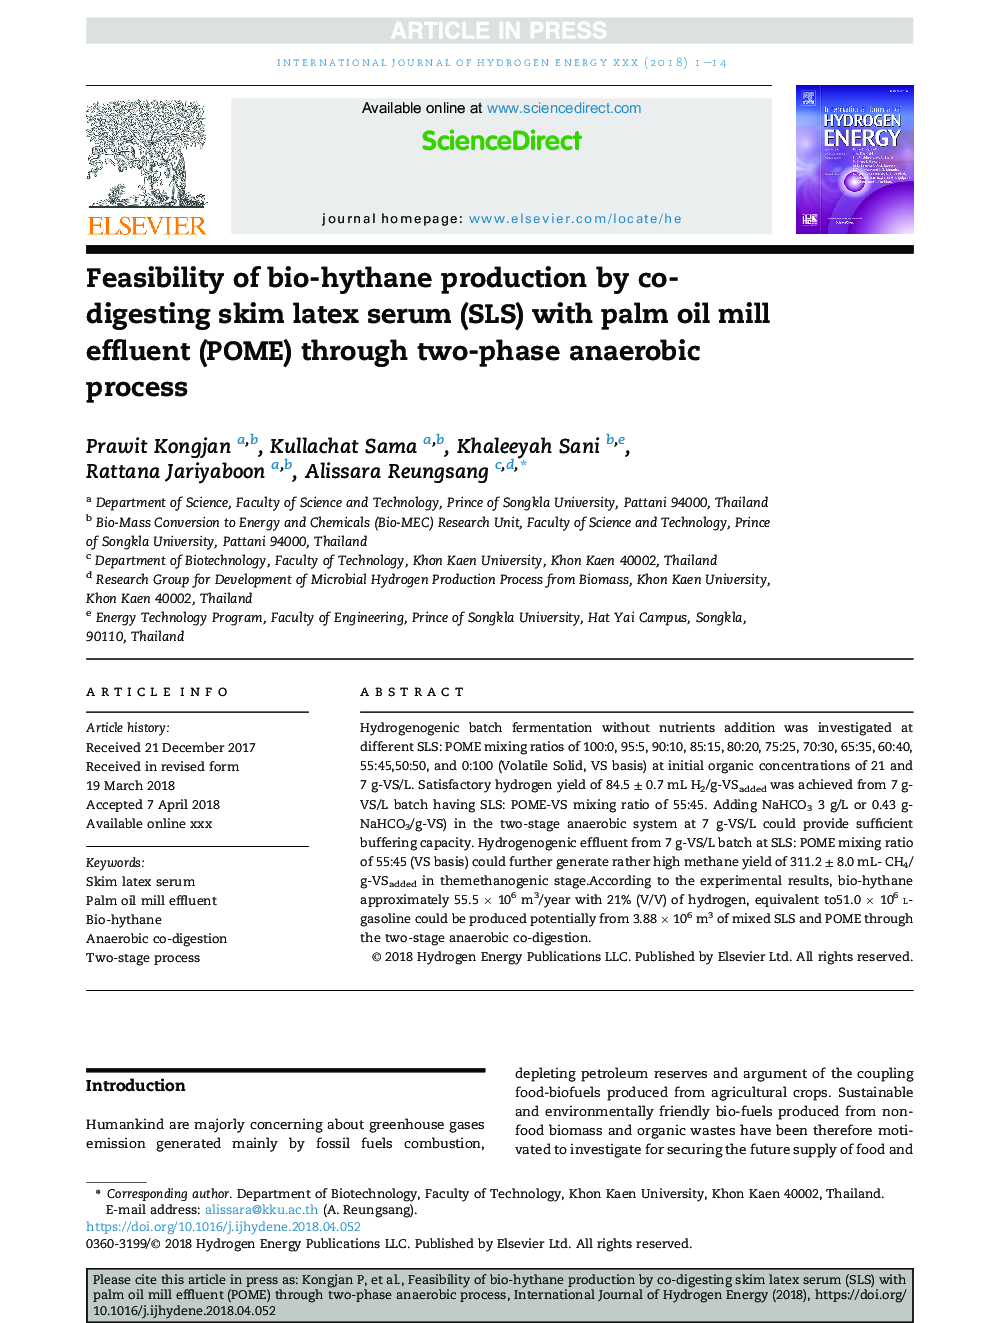 Feasibility of bio-hythane production by co-digesting skim latex serum (SLS) with palm oil mill effluent (POME) through two-phase anaerobic process